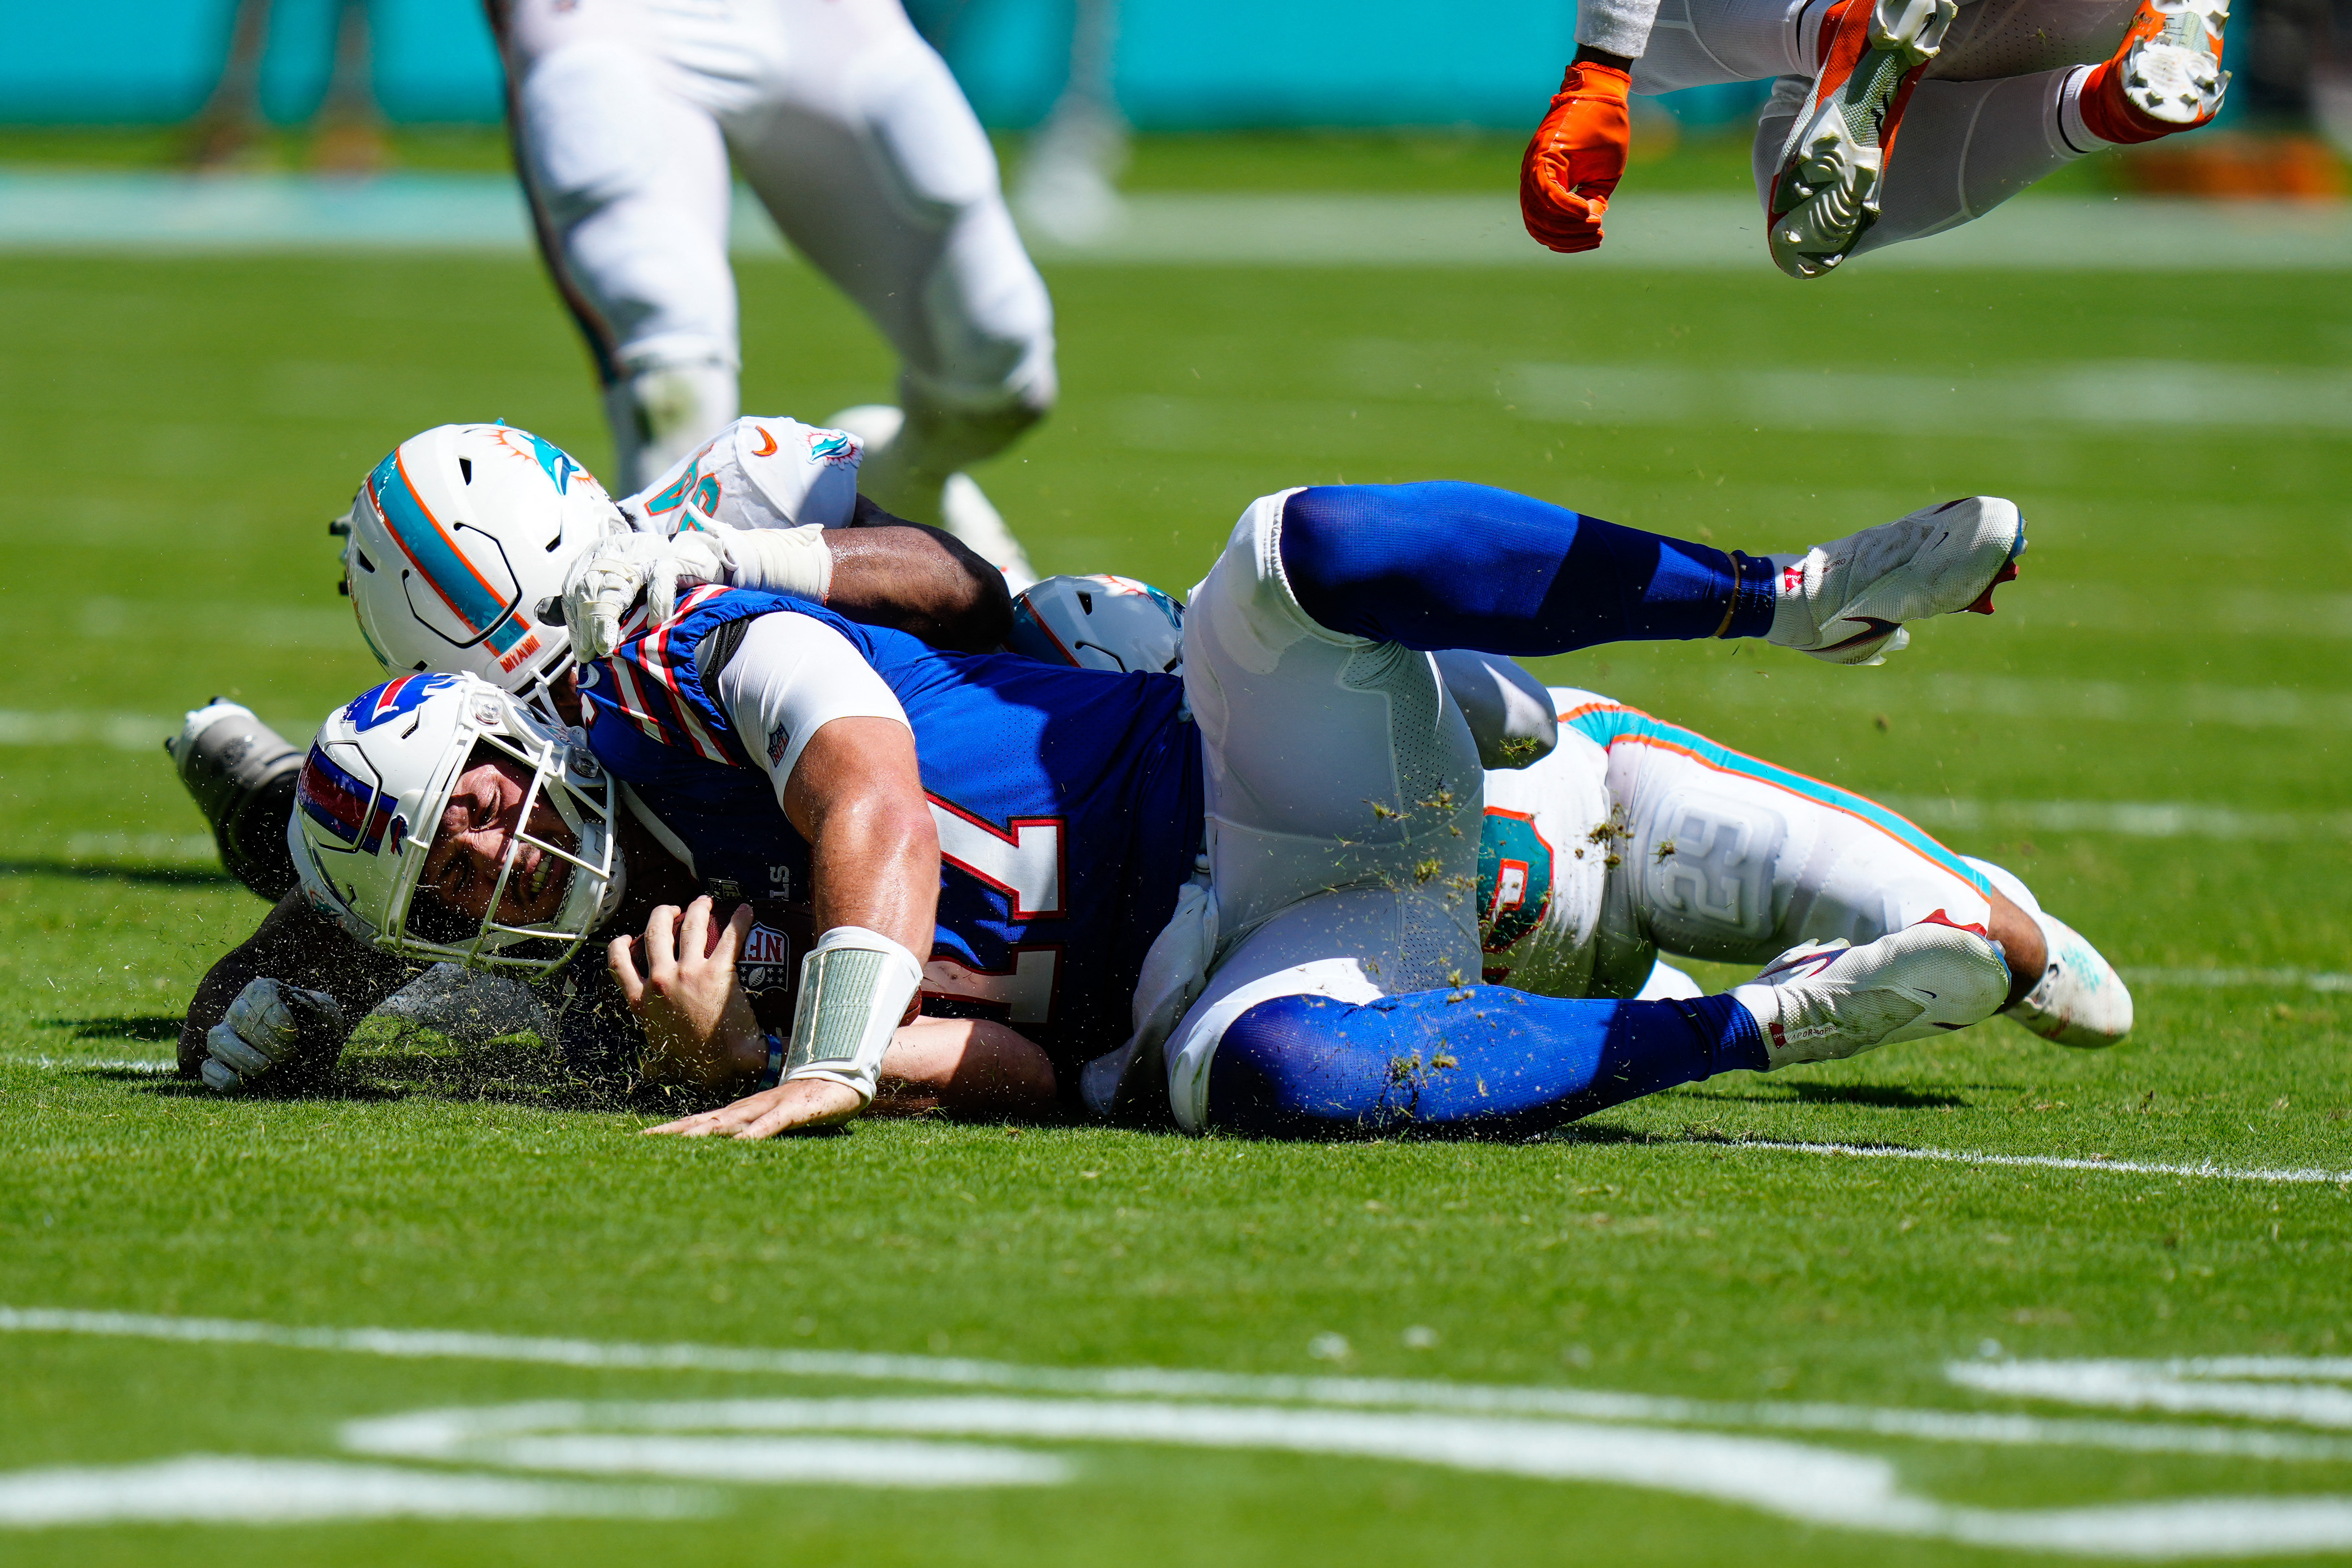 Buffalo Bills can't overcome injuries and mistakes, fall to Dolphins 21-19